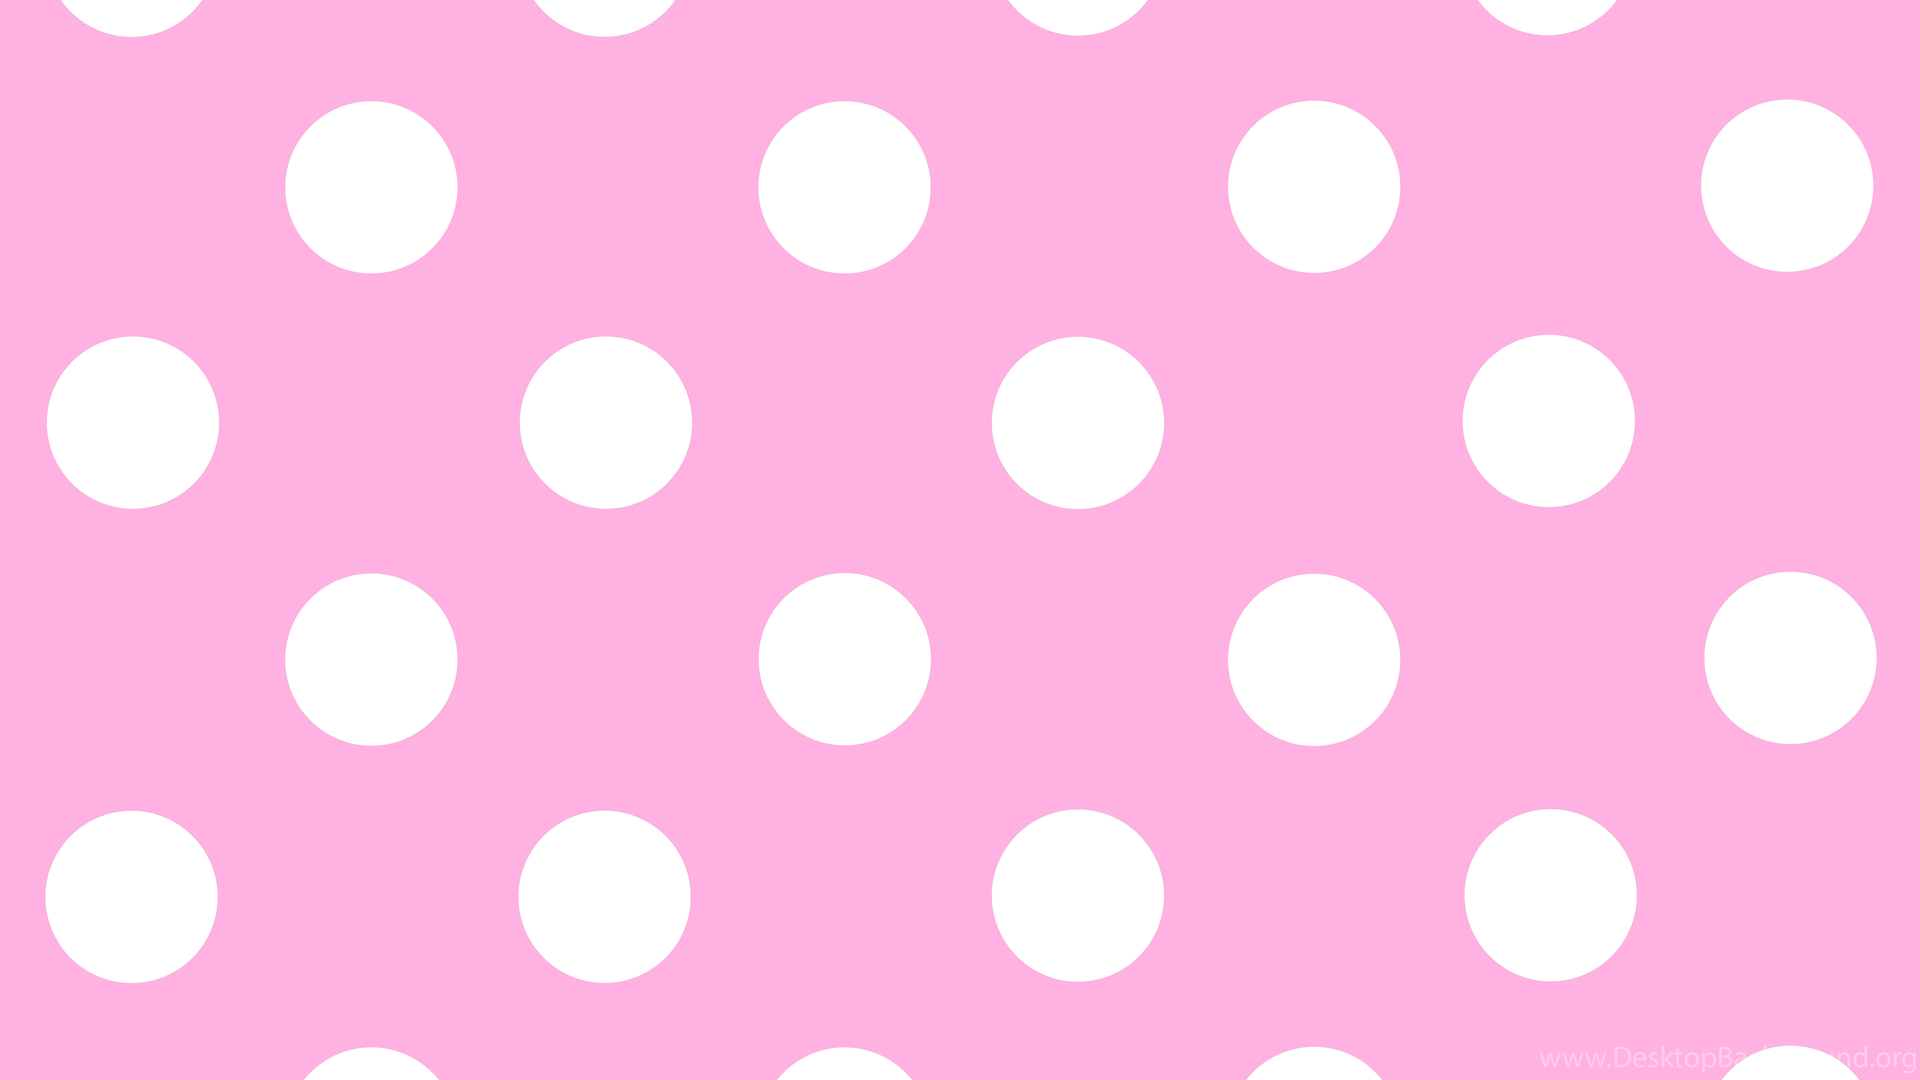 Wallpapers Pink And White Polka Dot Dots Pattern Free Clip Art Desktop Background